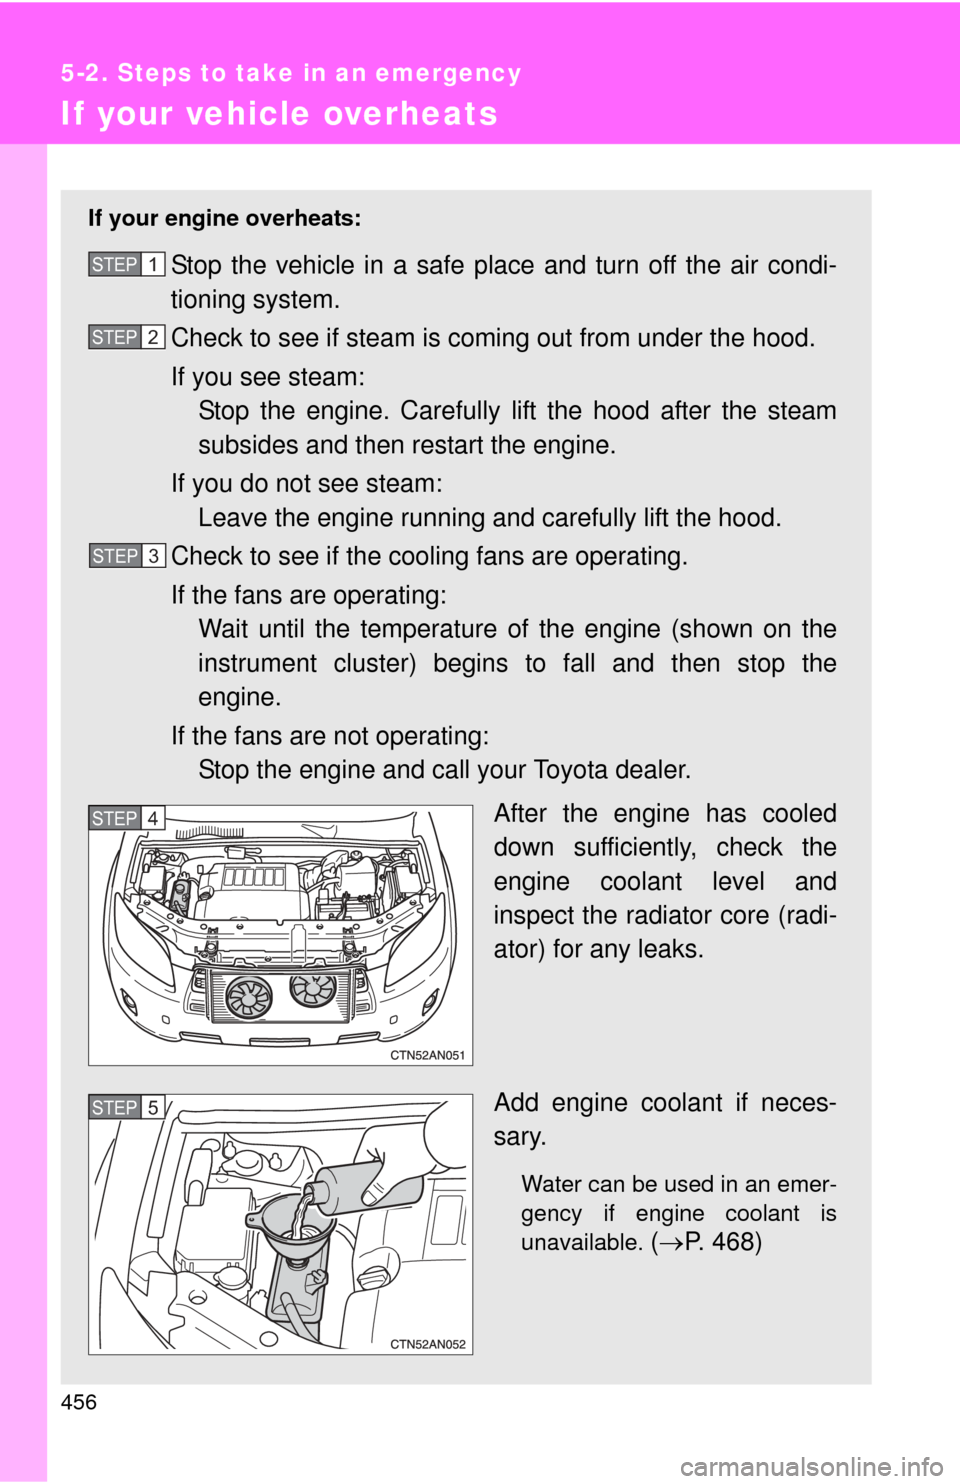 TOYOTA RAV4 2010 XA30 / 3.G User Guide 456
5-2. Steps to take in an emergency
If your vehicle overheats
If your engine overheats:
Stop the vehicle in a safe place and turn off the air condi-
tioning system.
Check to see if steam is coming 